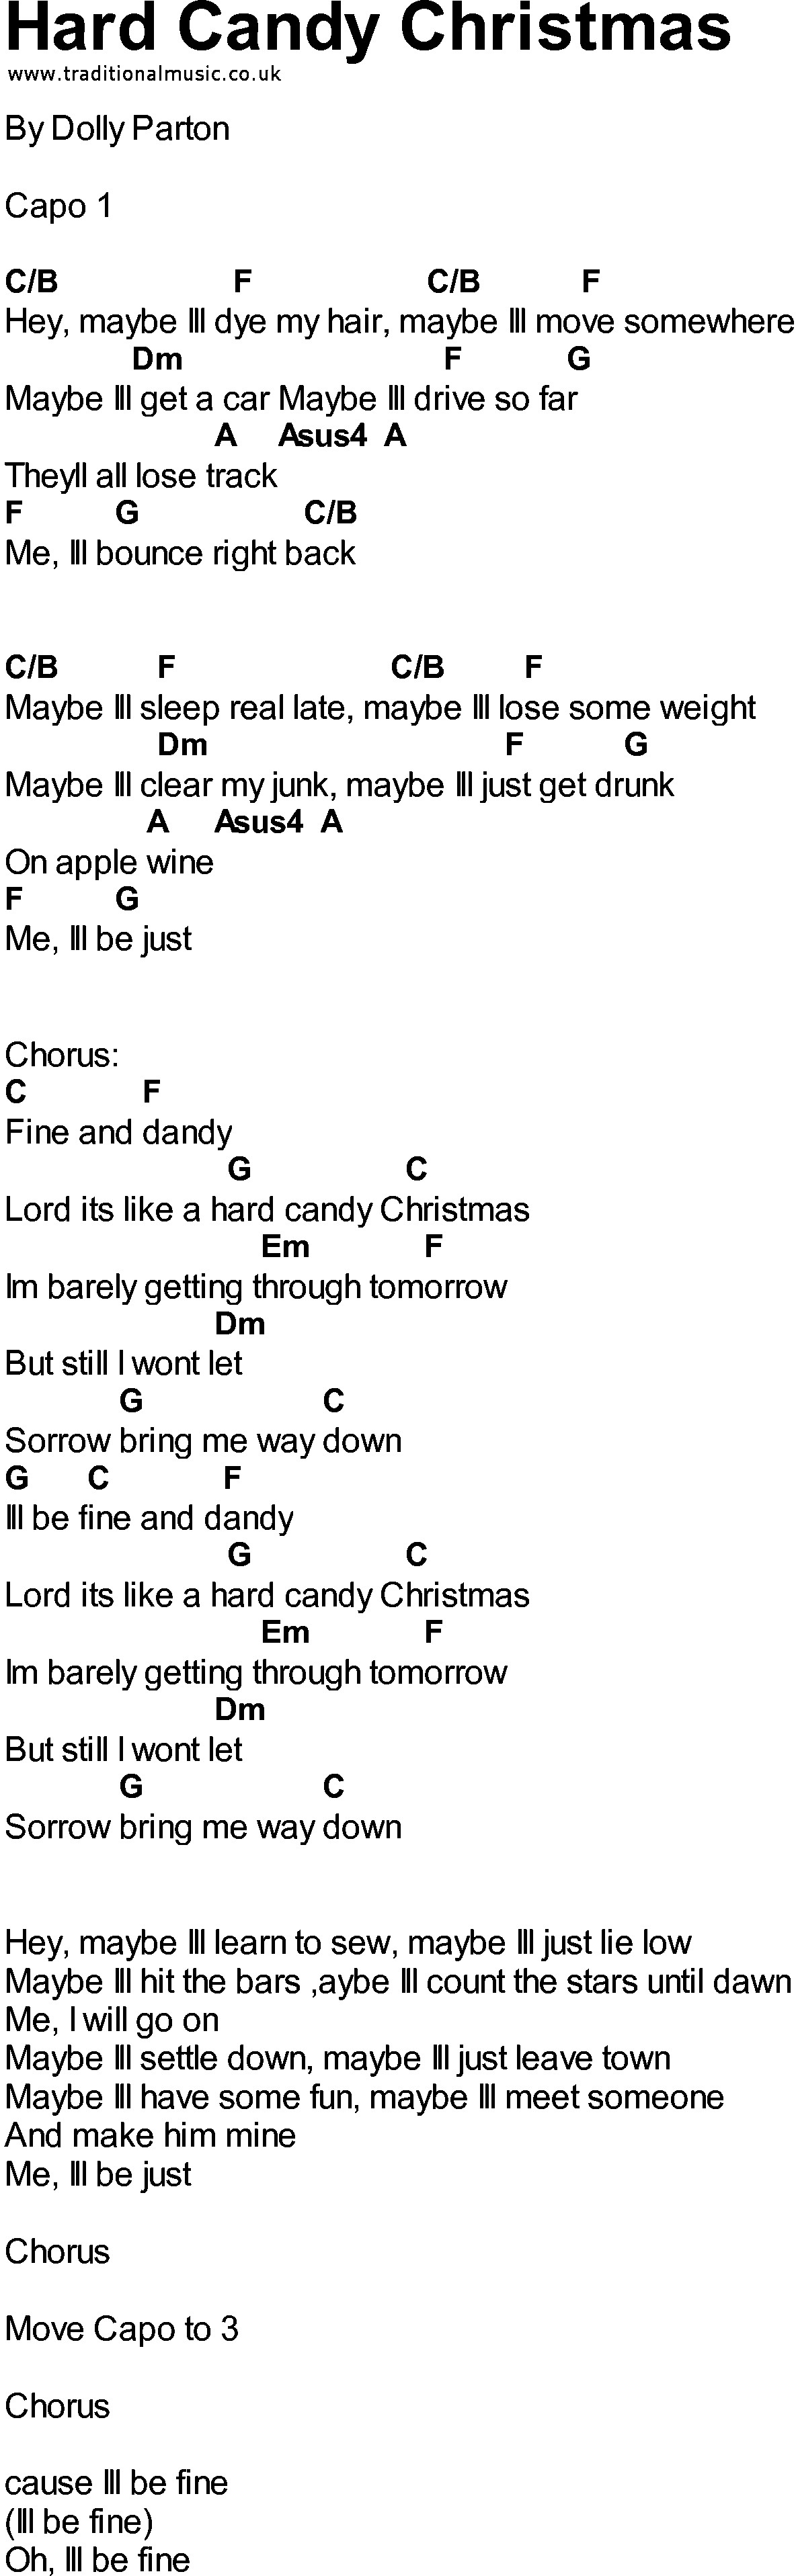 Hard Candy Christmas Chords
 Bluegrass songs with chords Hard Candy Christmas